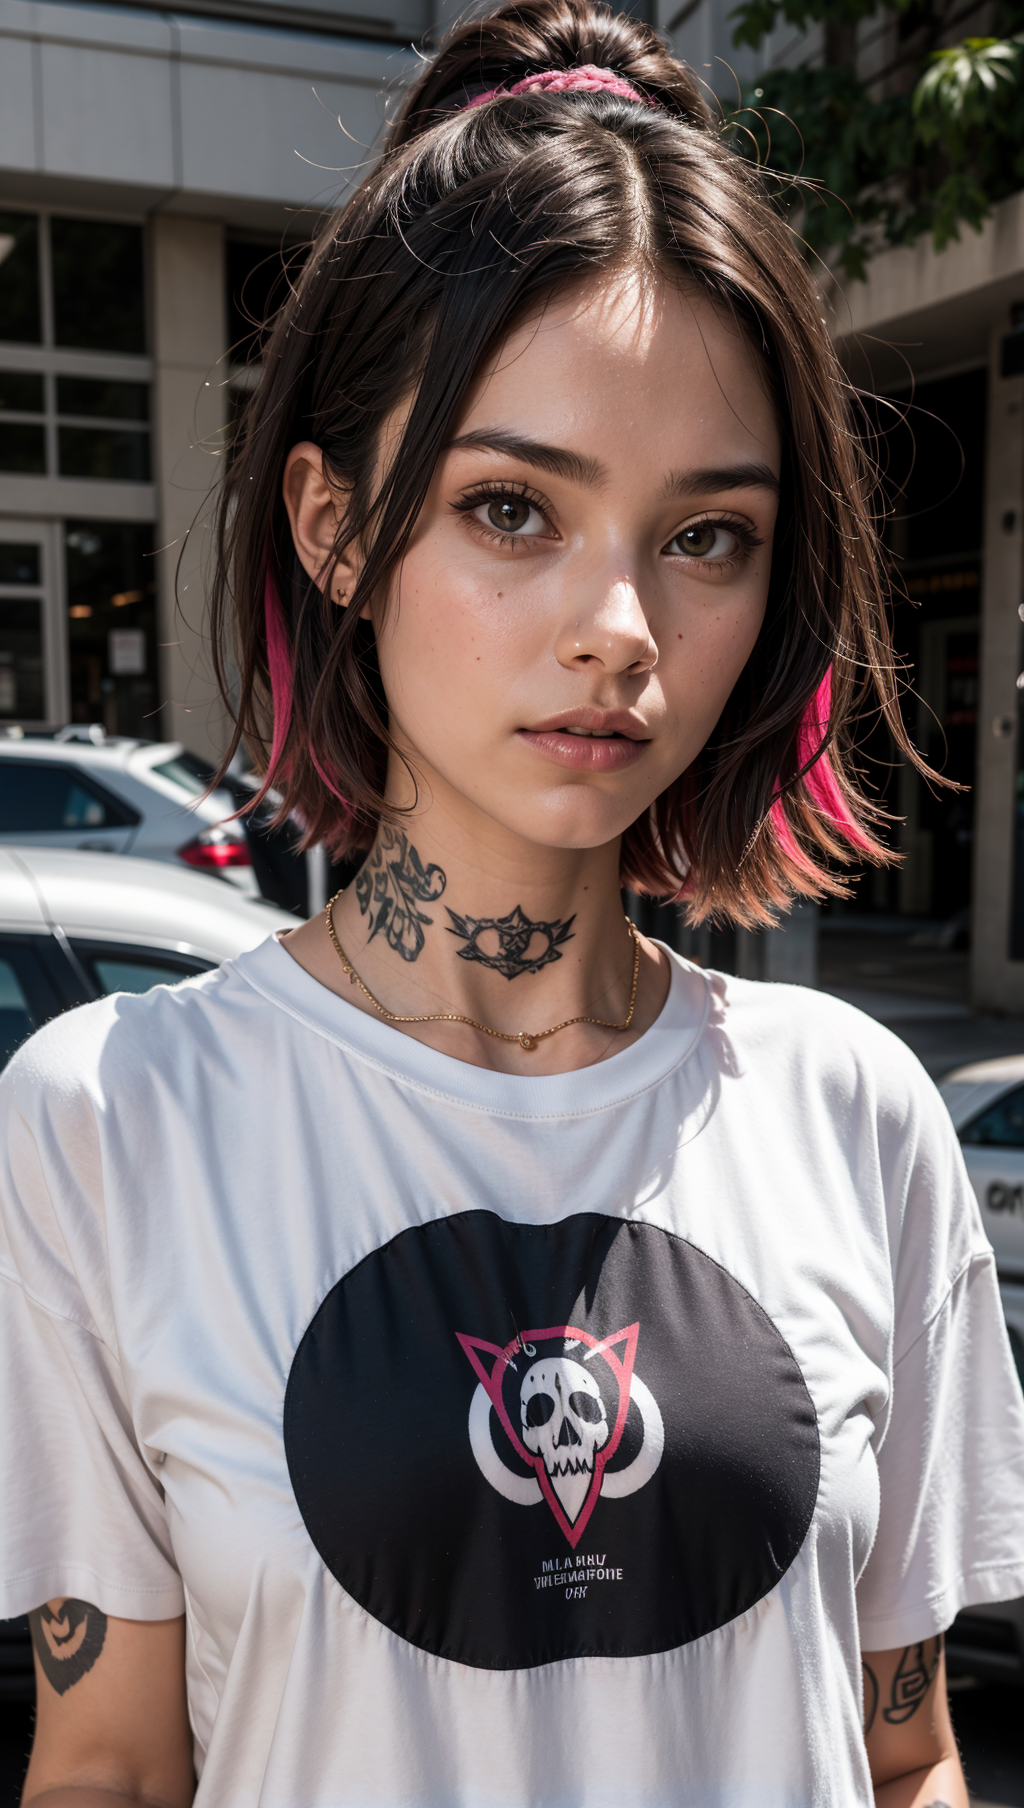 upper body portrait,raw essence of a tattooed street style icon,rebellious energy,wearing oversized shirt  with logos,vibr...